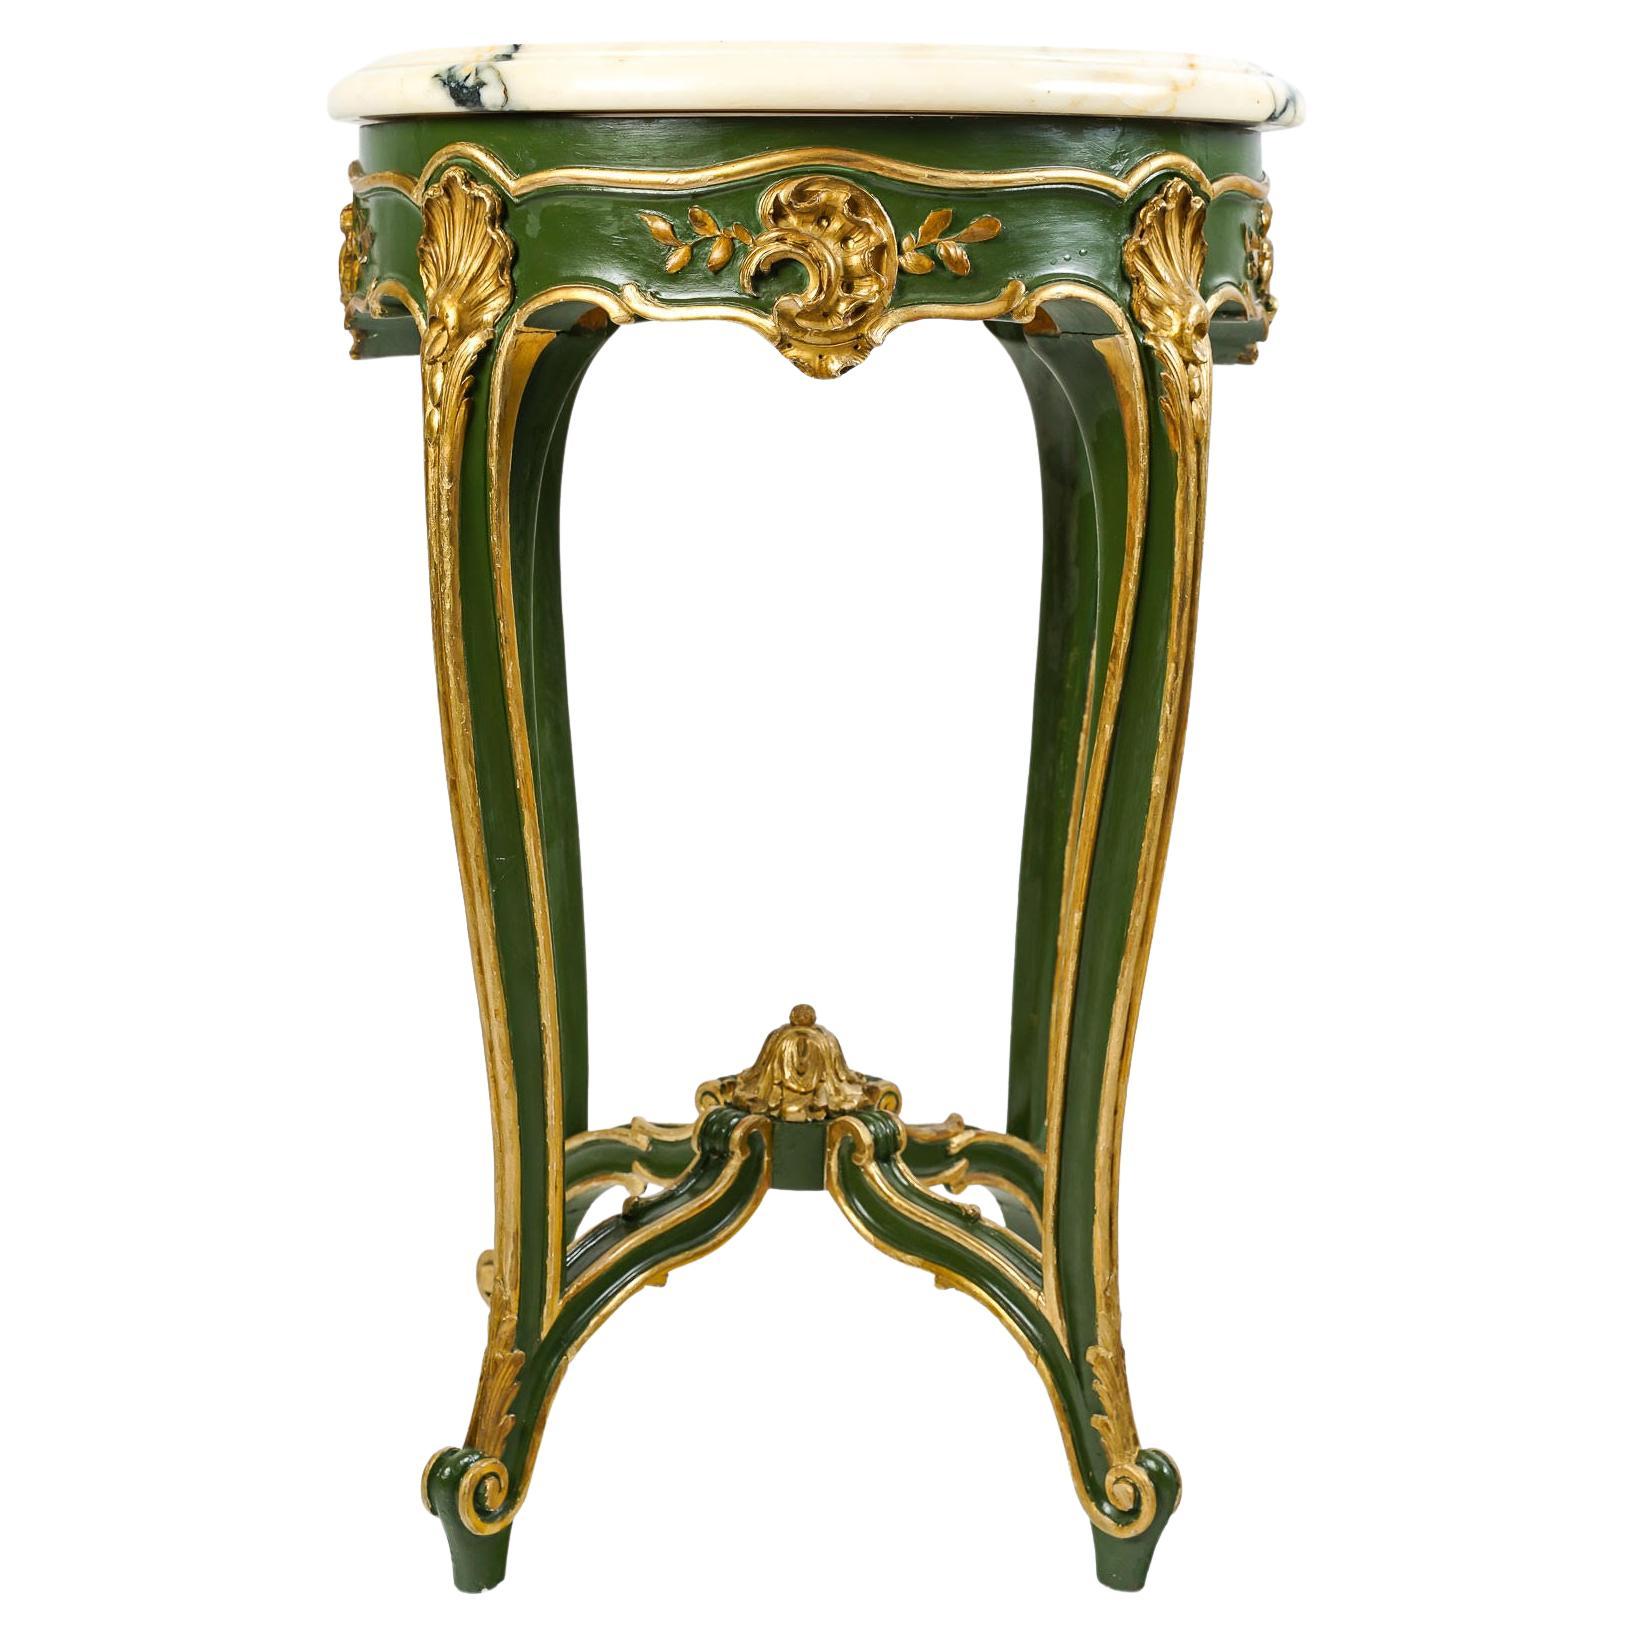 Carved, Painted and Gilded Wood Pedestal Table, Louis XV style.